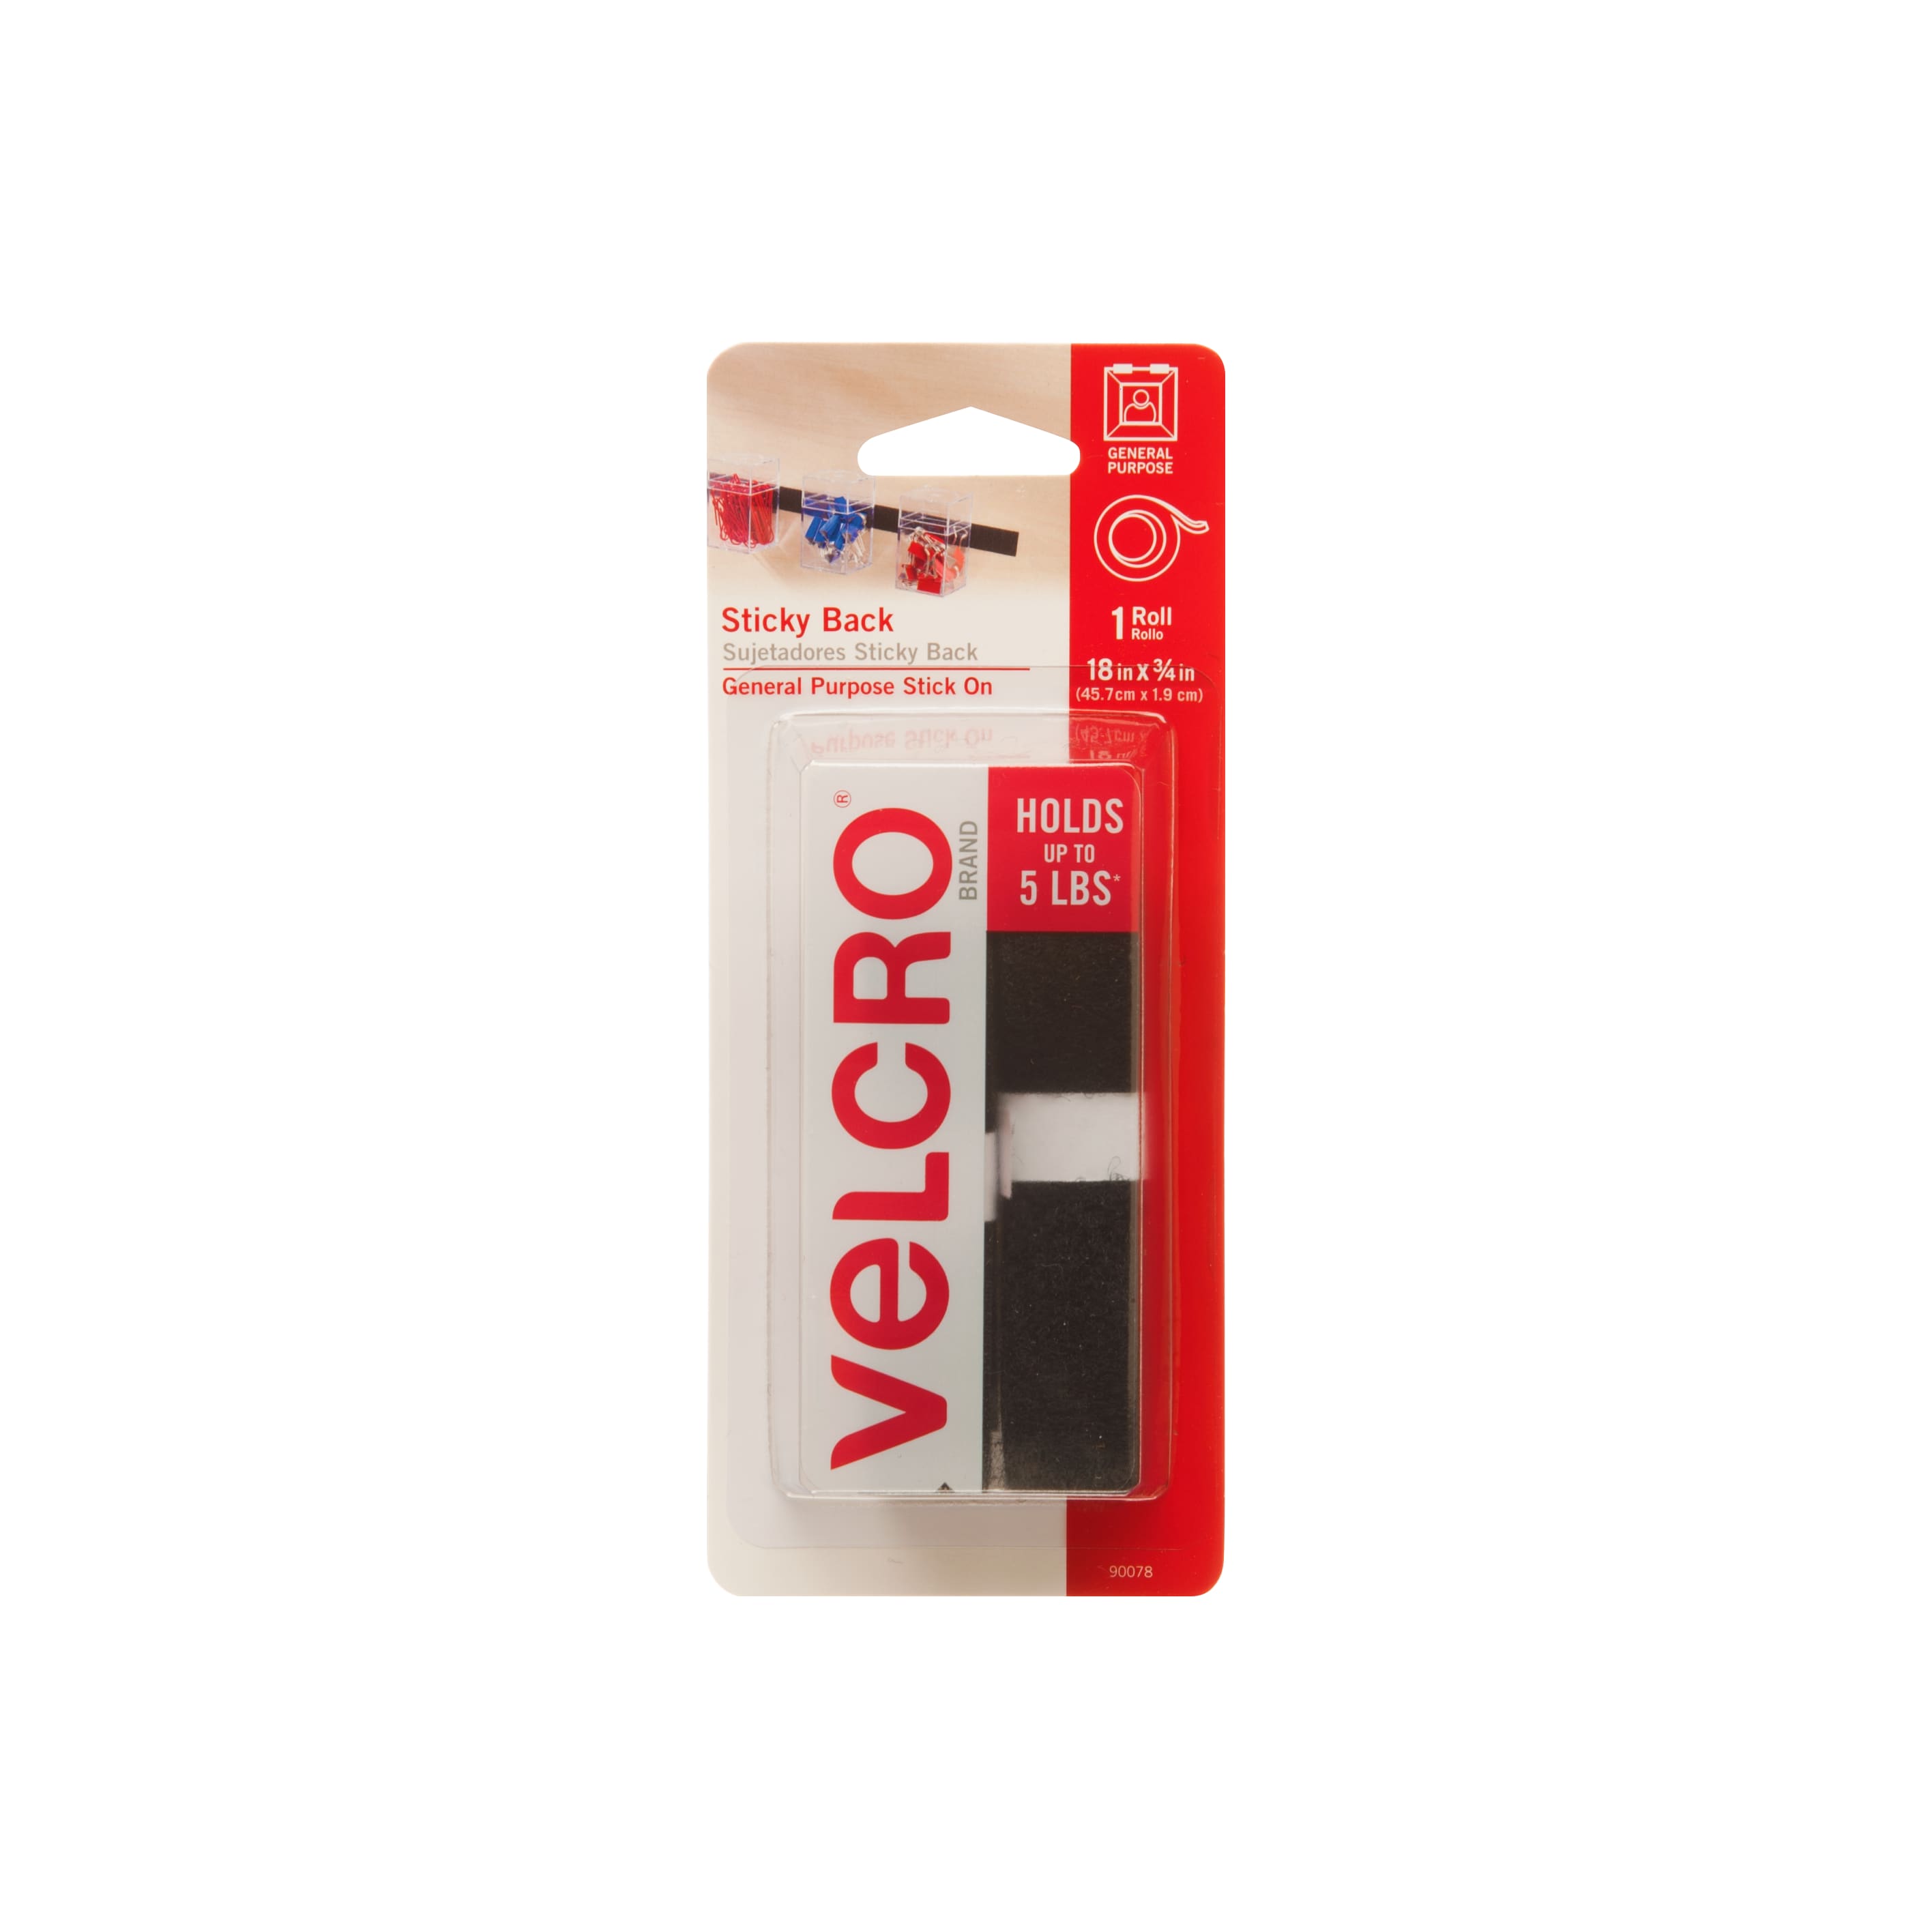 Wall Molding Strip with Loop Velcro